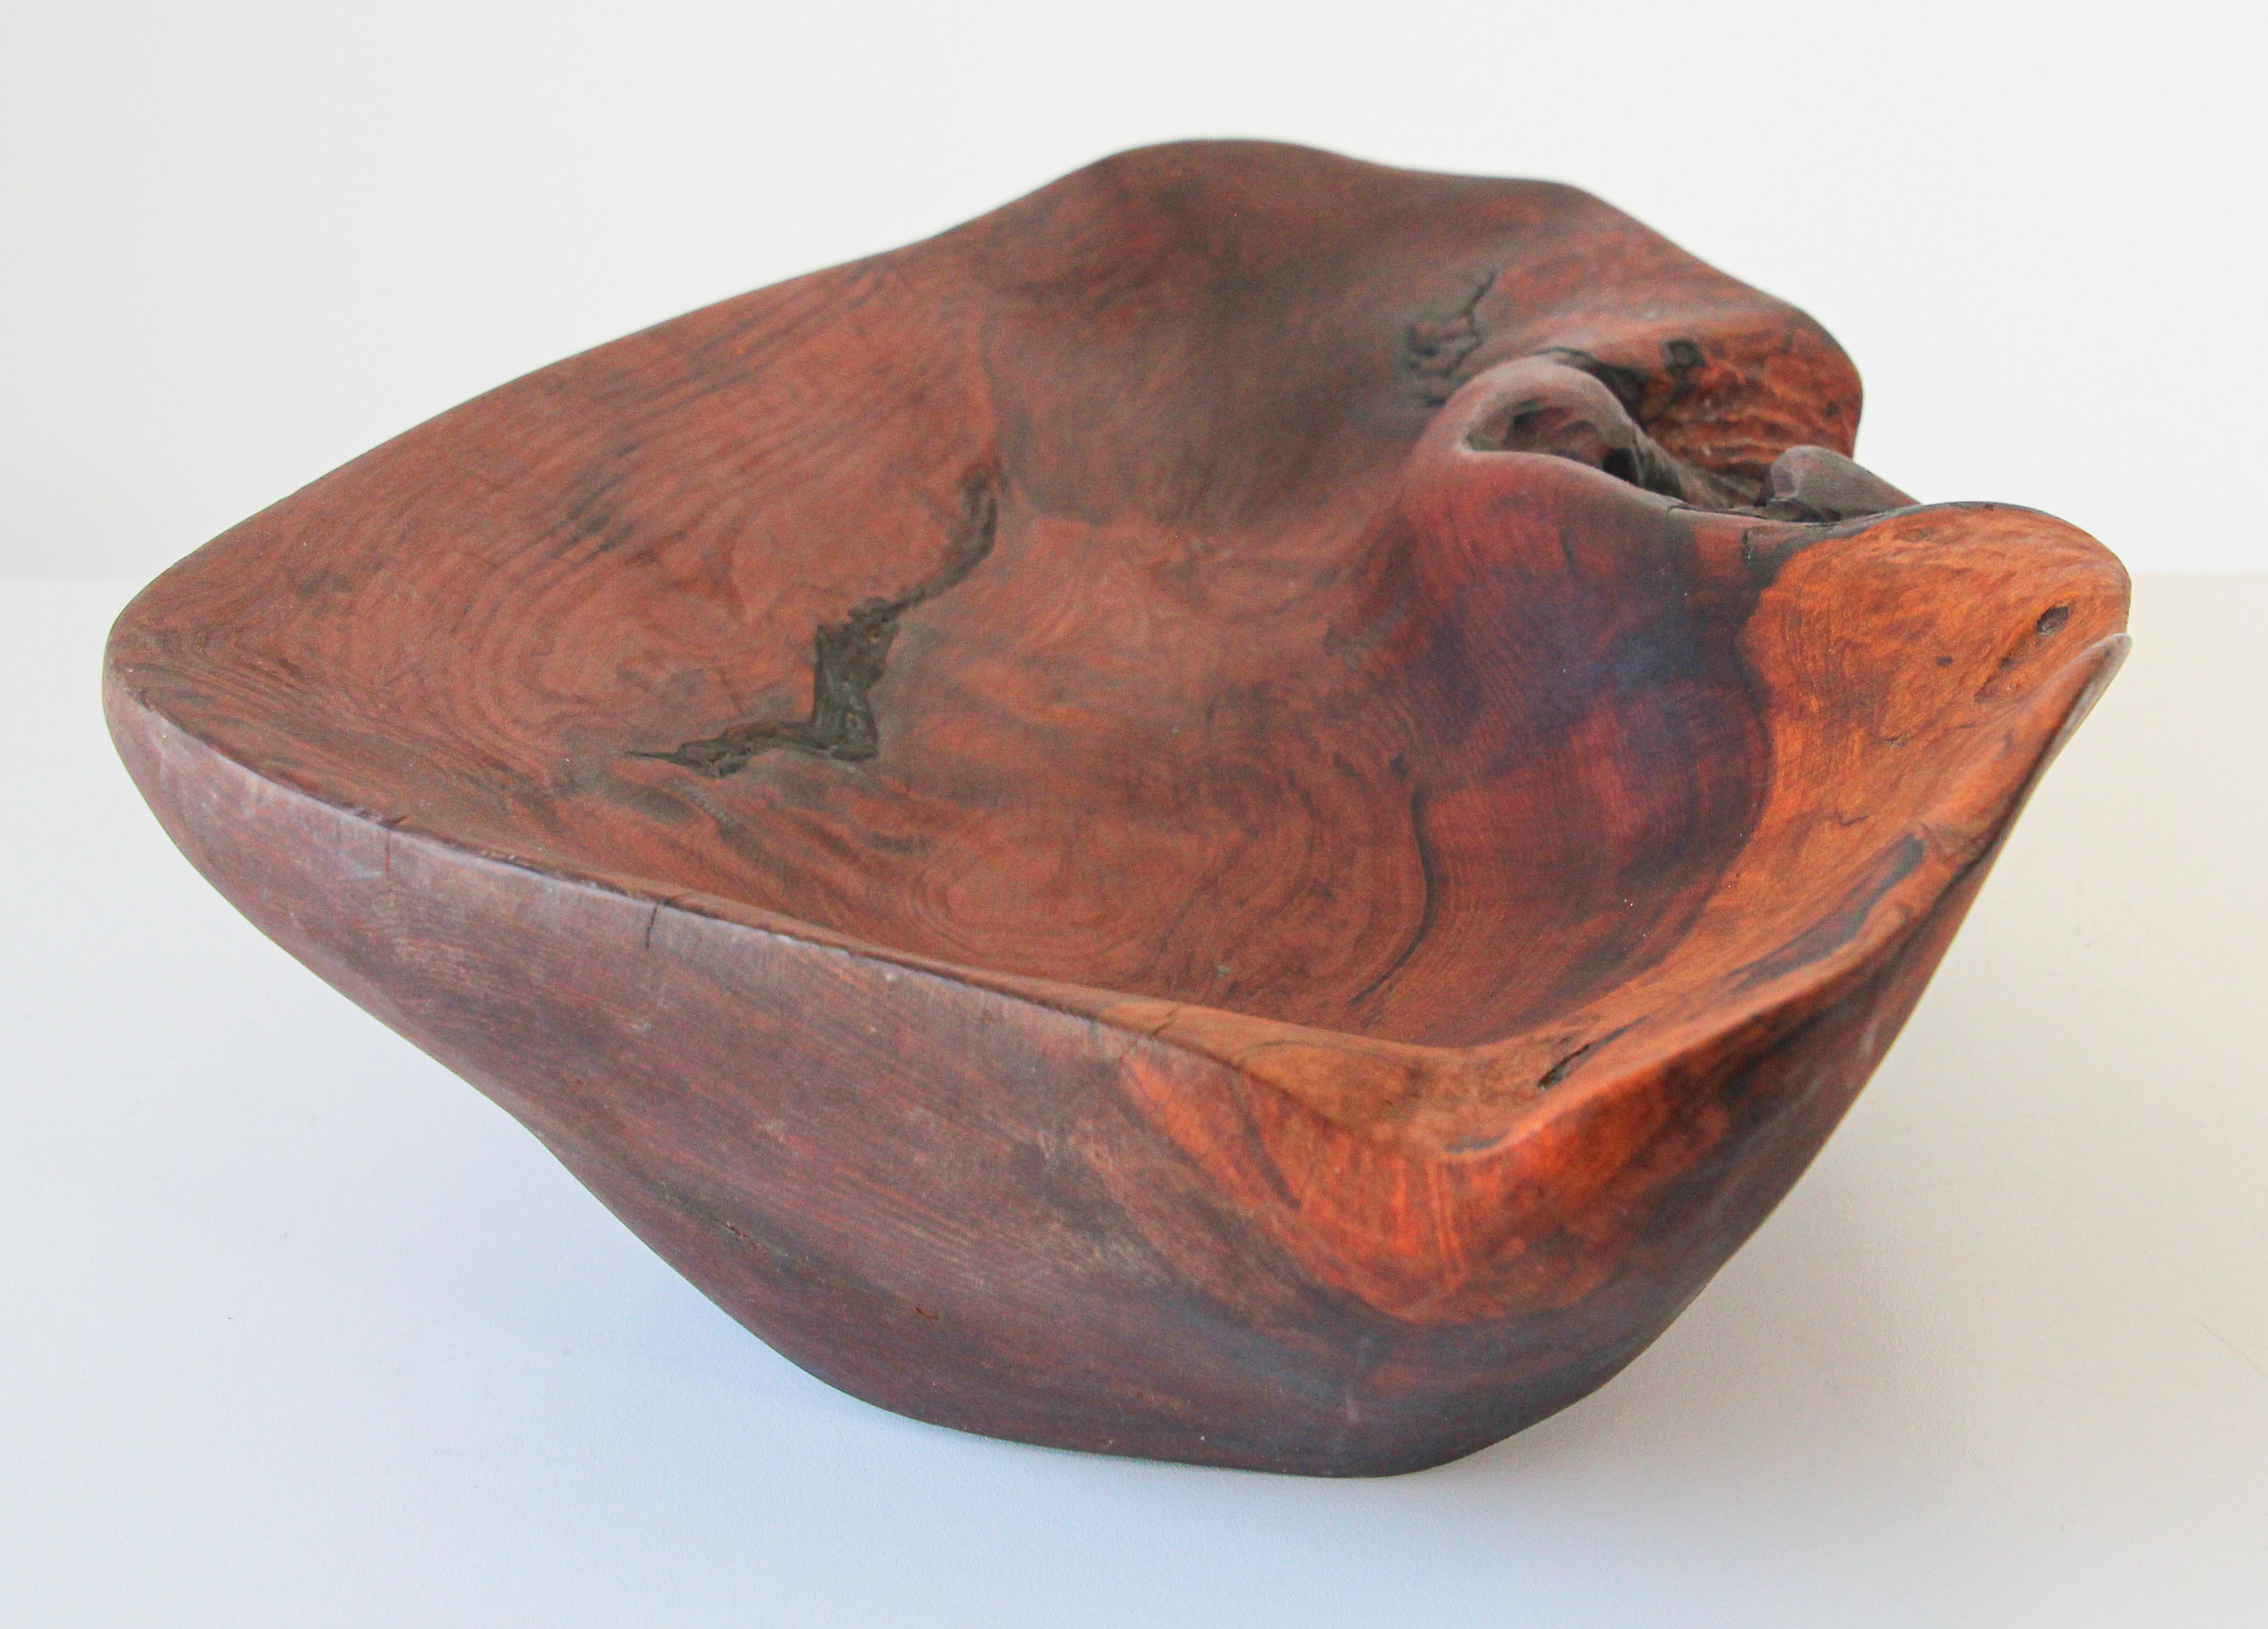 Exceptionally crafted and large sculptural Brutalist freeform burl wood centerpiece bowl.
Hand carved from a unique piece of cherry burl wood. A burl occurs naturally through tree growth where the grain has grown in a deformed manner, usually due